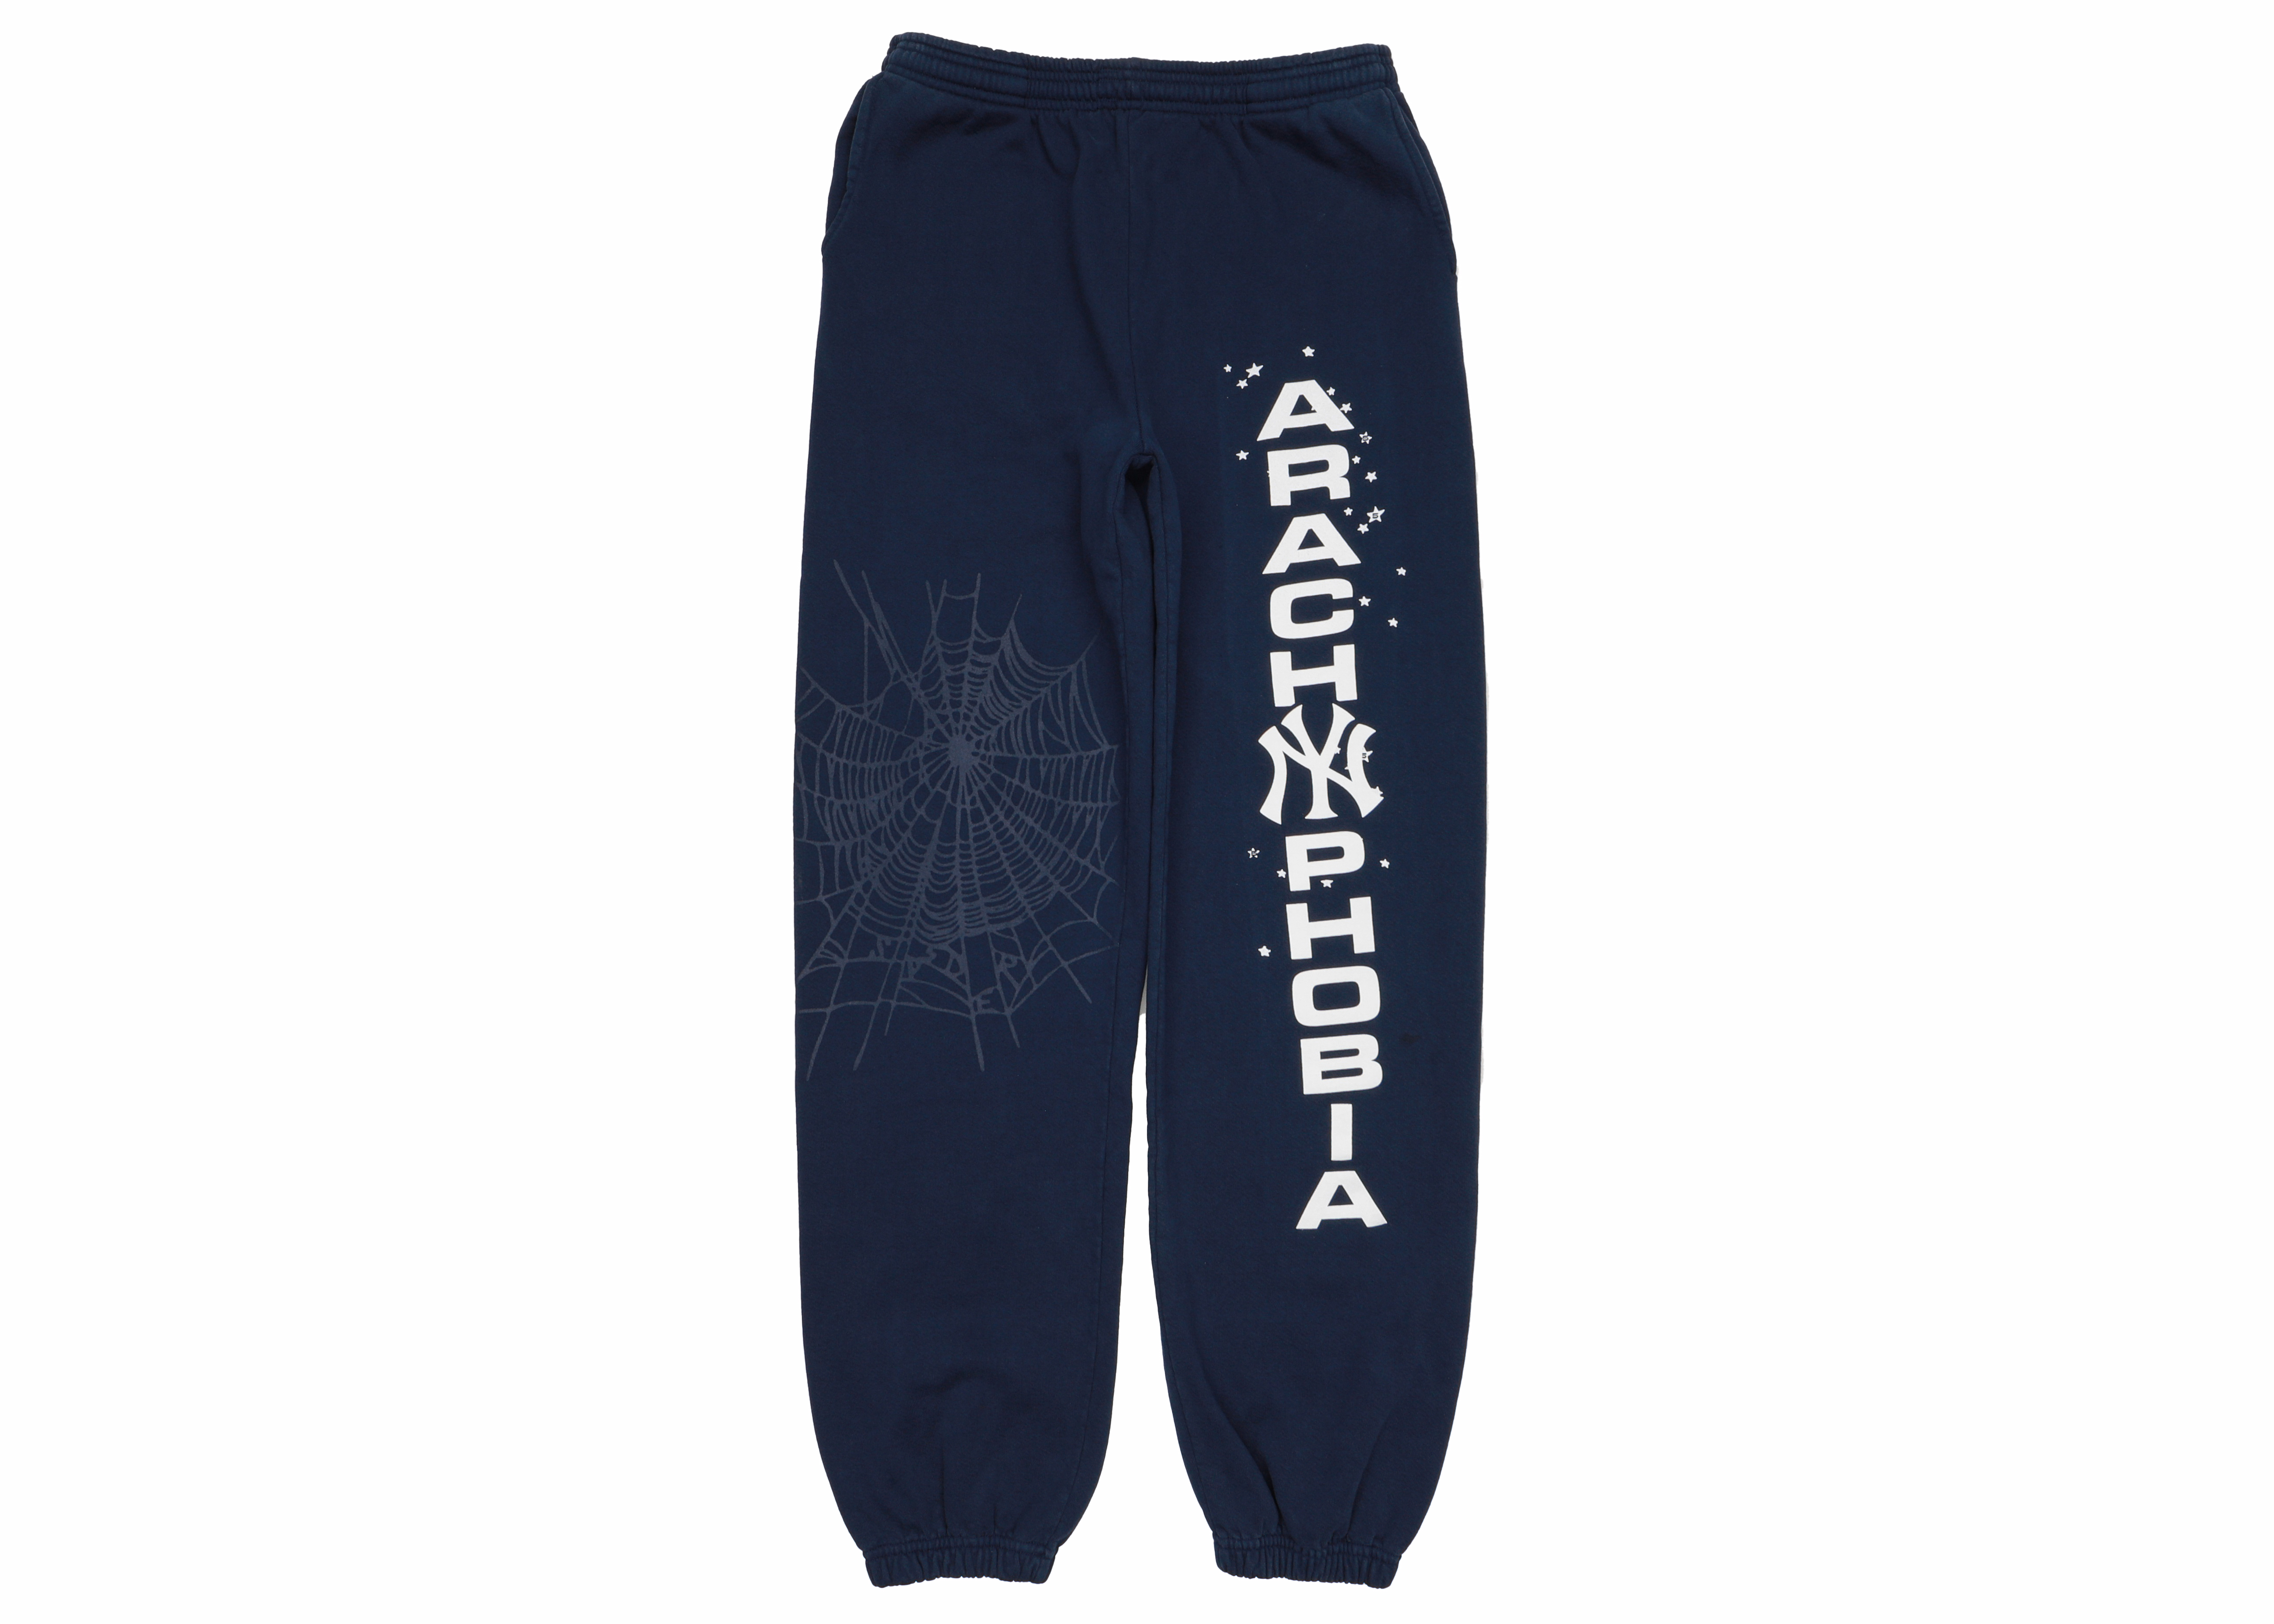 Sp5der Arach NY Phobia セットアップトップス